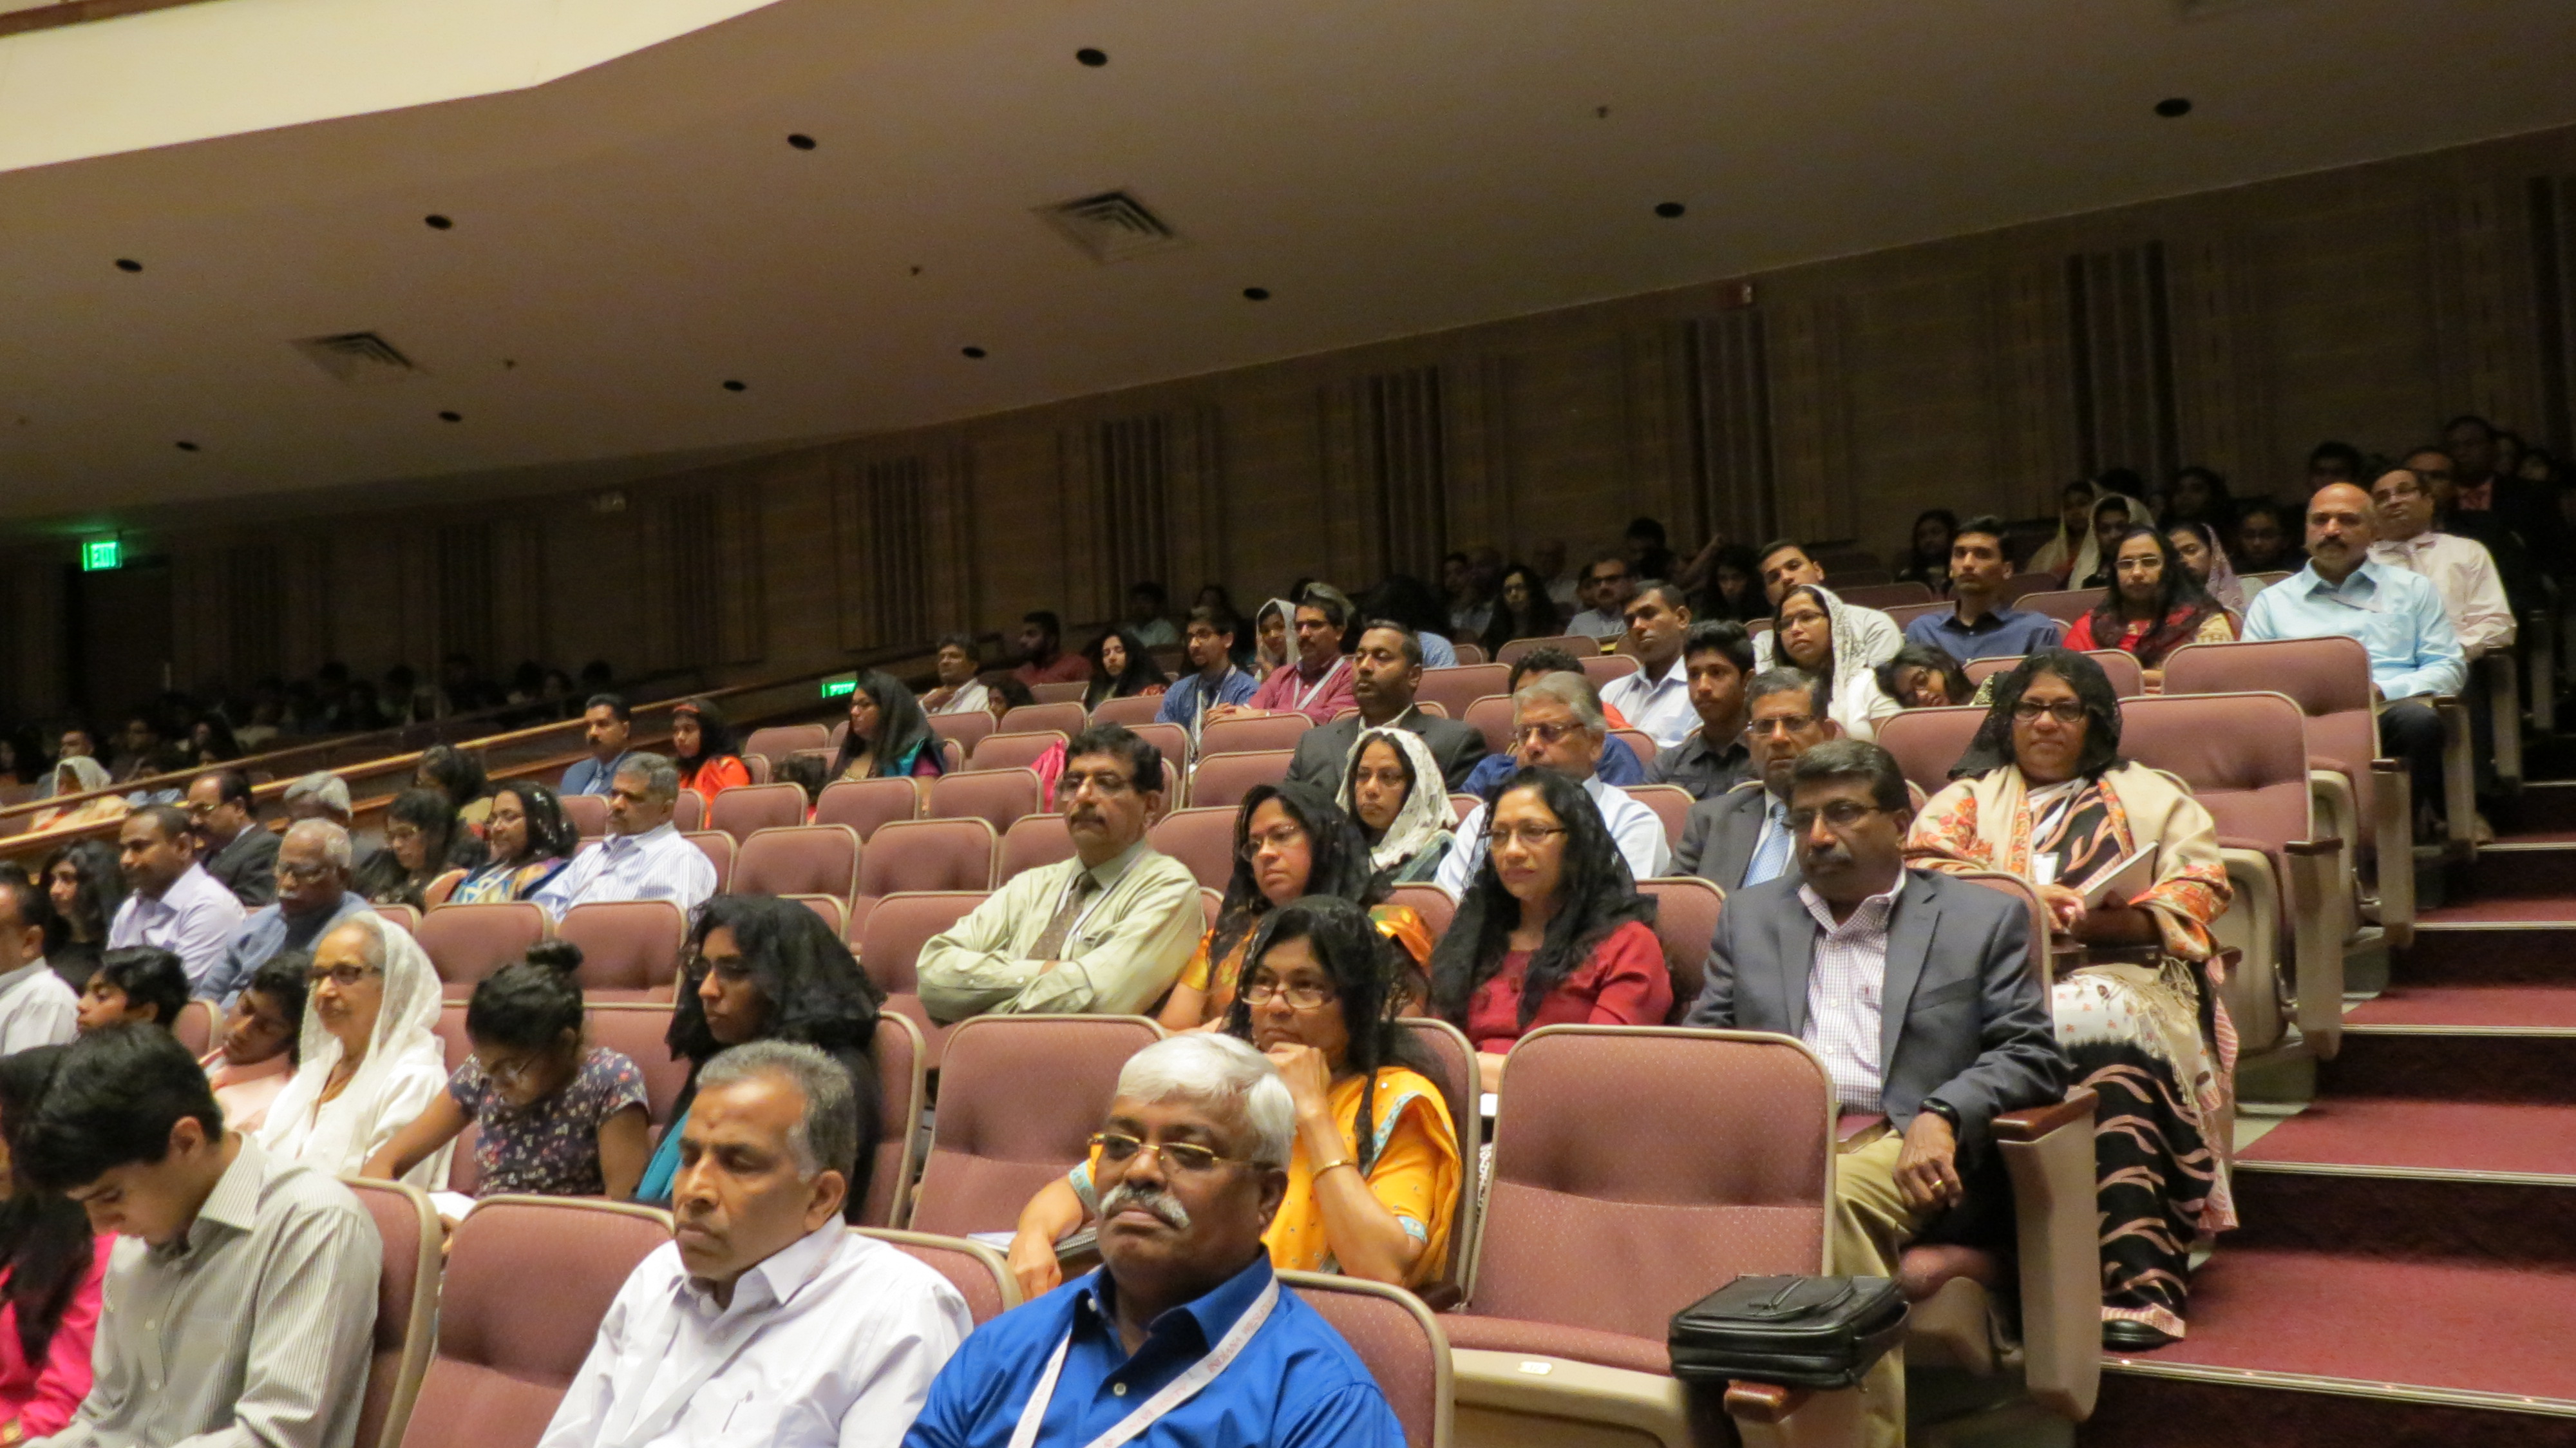 5th Day PLENARY AUDIENCE 5